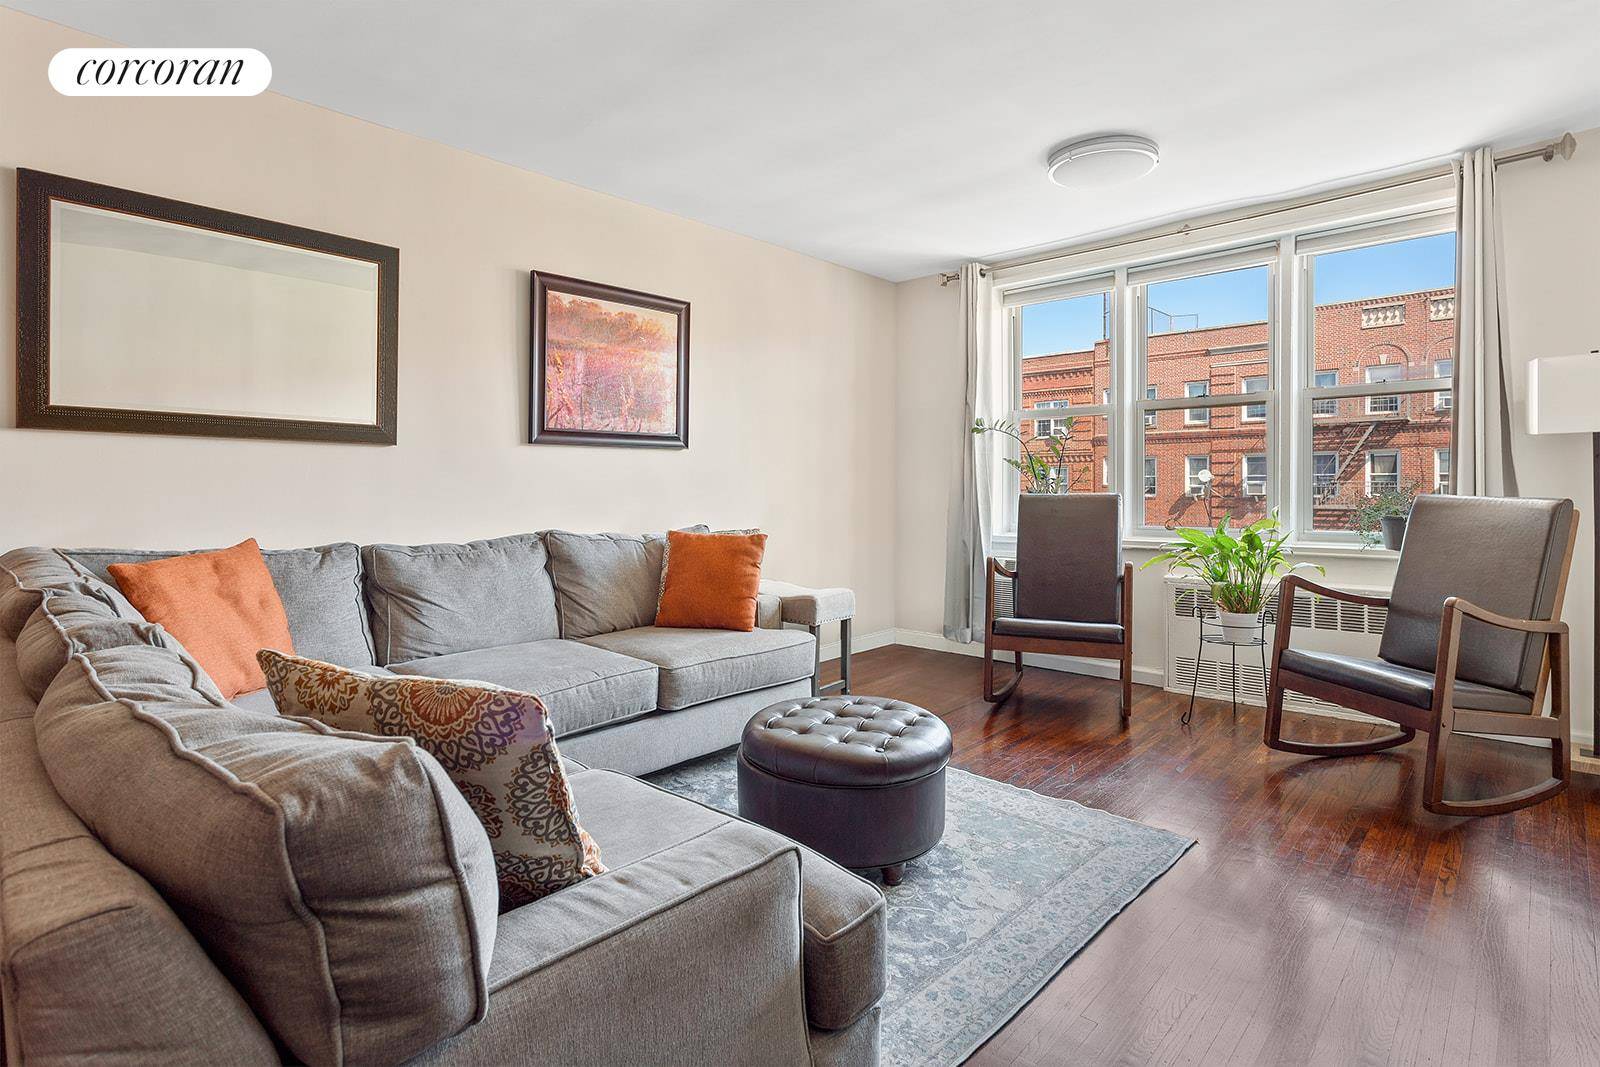 In the heart of Ditmas Park beautifully renovated large 2 bedroom apartment with views of the sky.